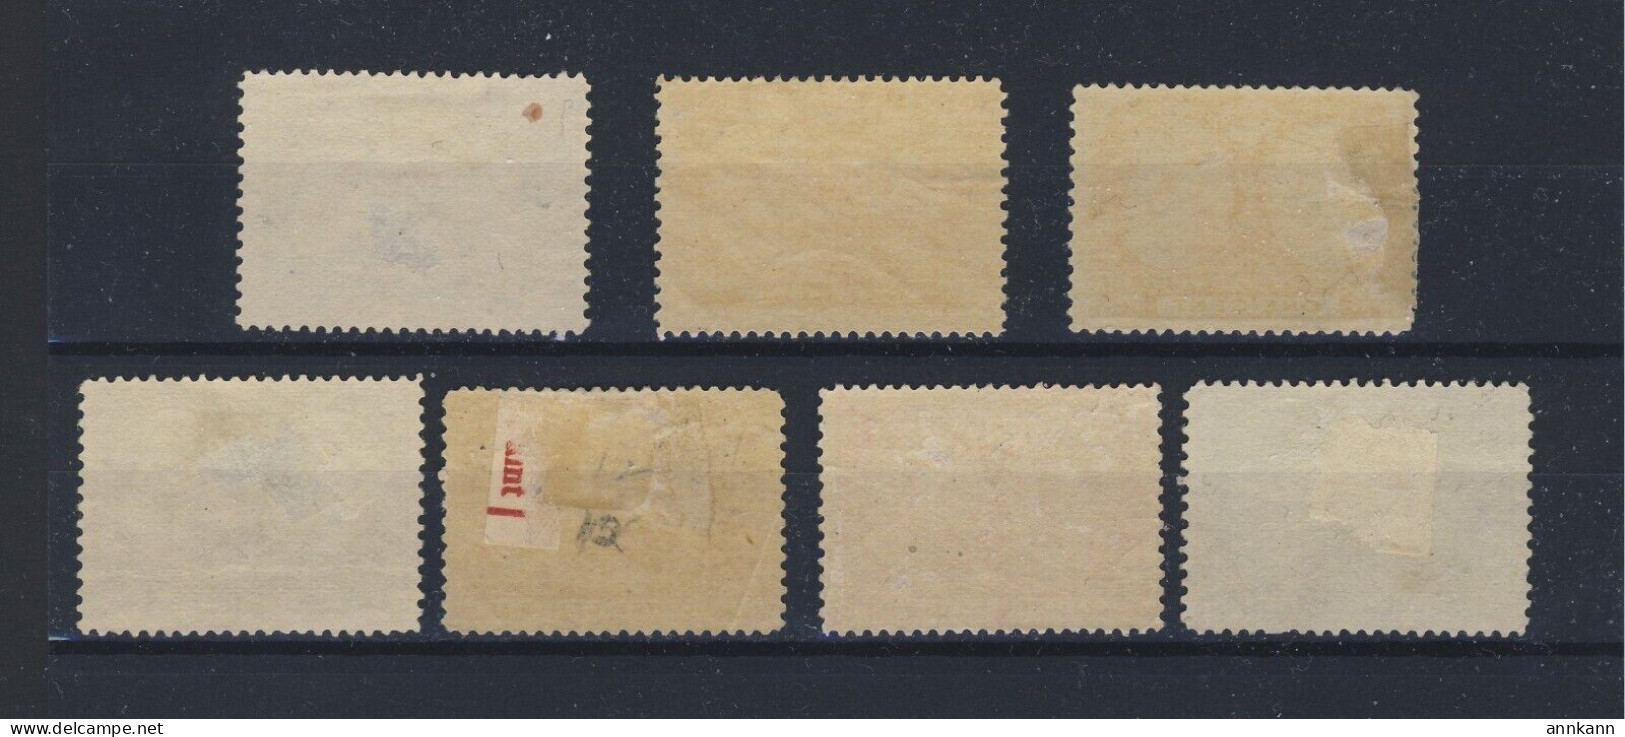 7x Canada Victoria Jubilee Stamps #50-1/2c 2x51 52 2x53 54-U Guide Value = $170.00 - Unused Stamps